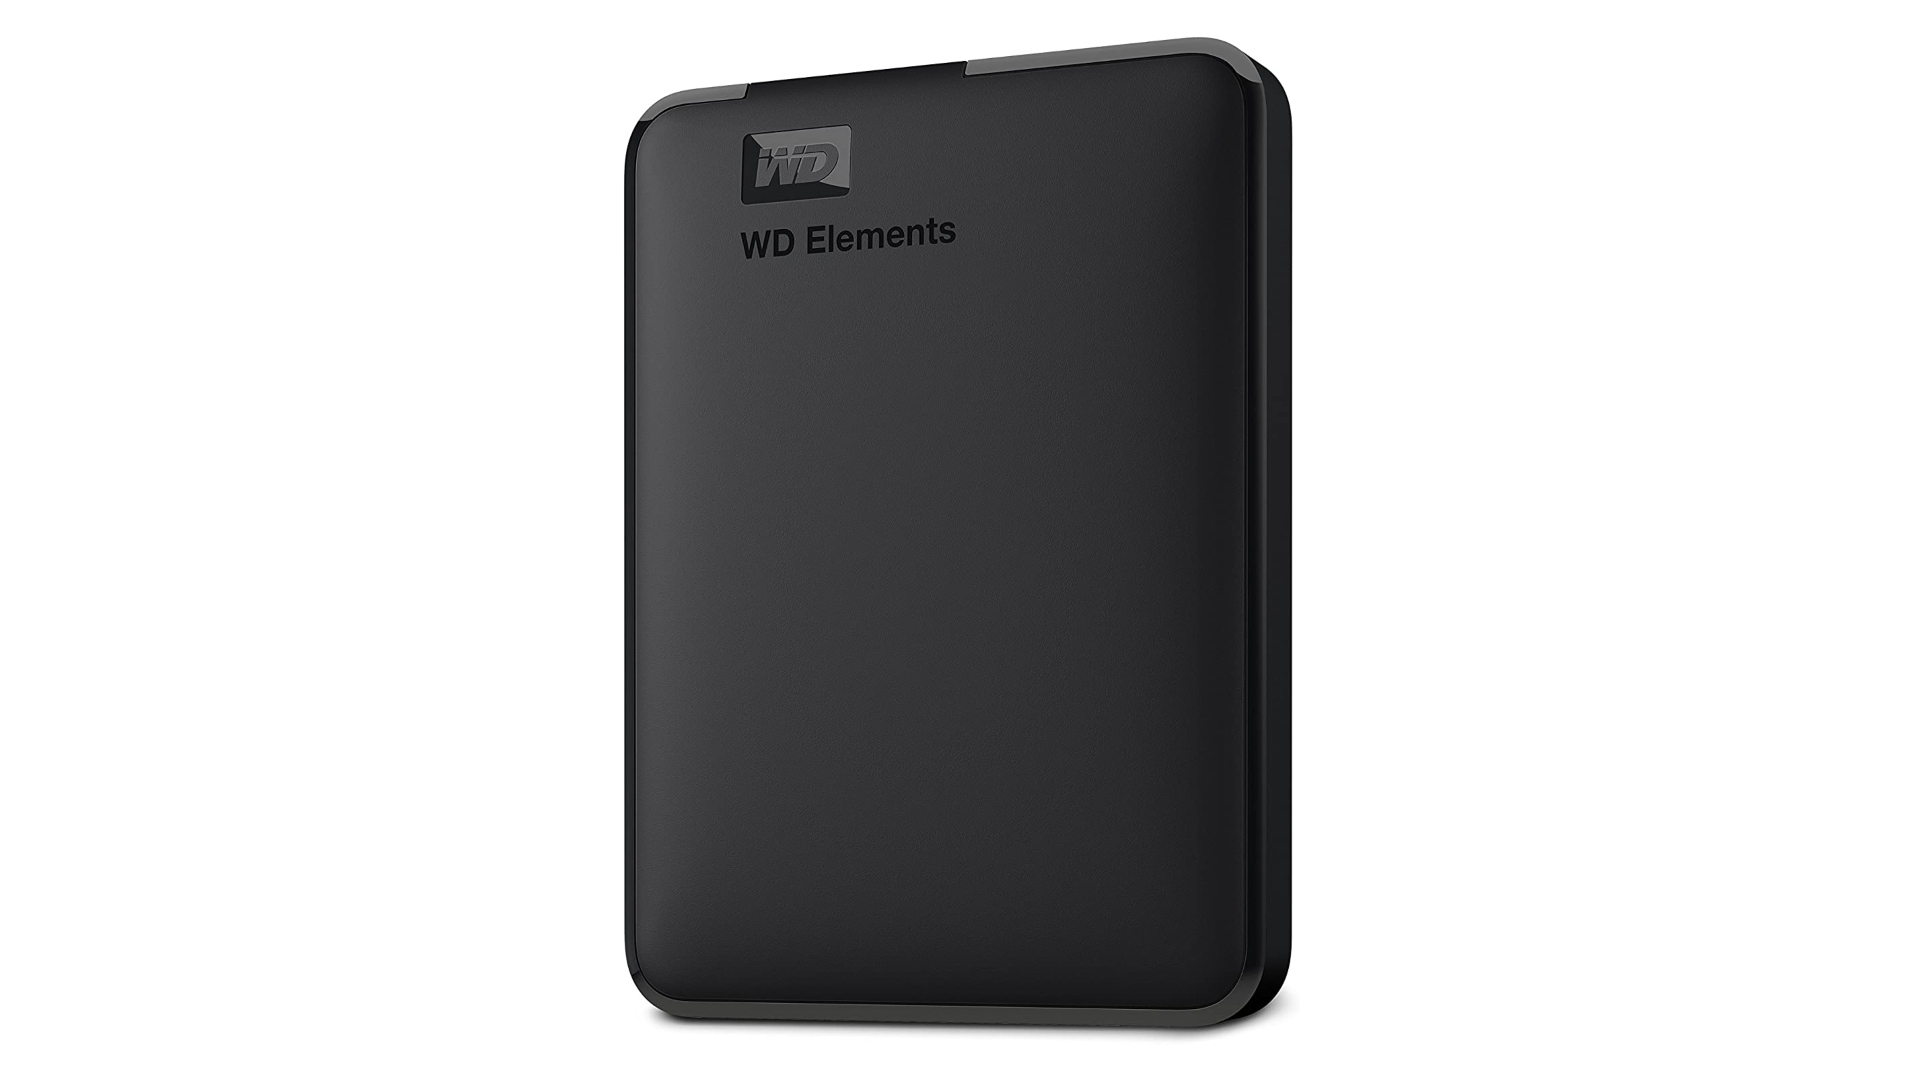 Western Digital 4TB HDDs are now $50 off